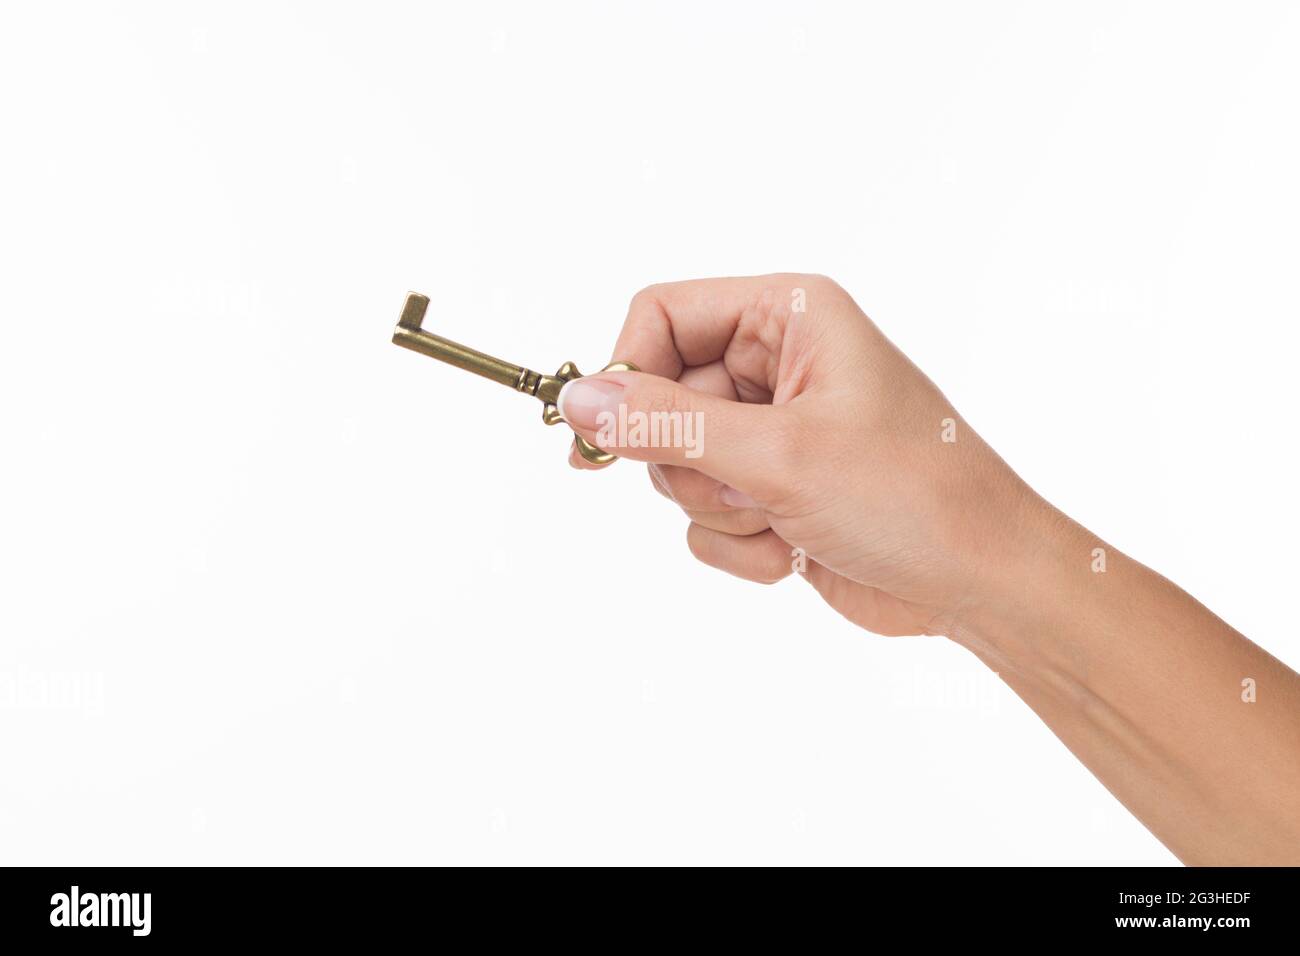 Hand with old key Stock Photo